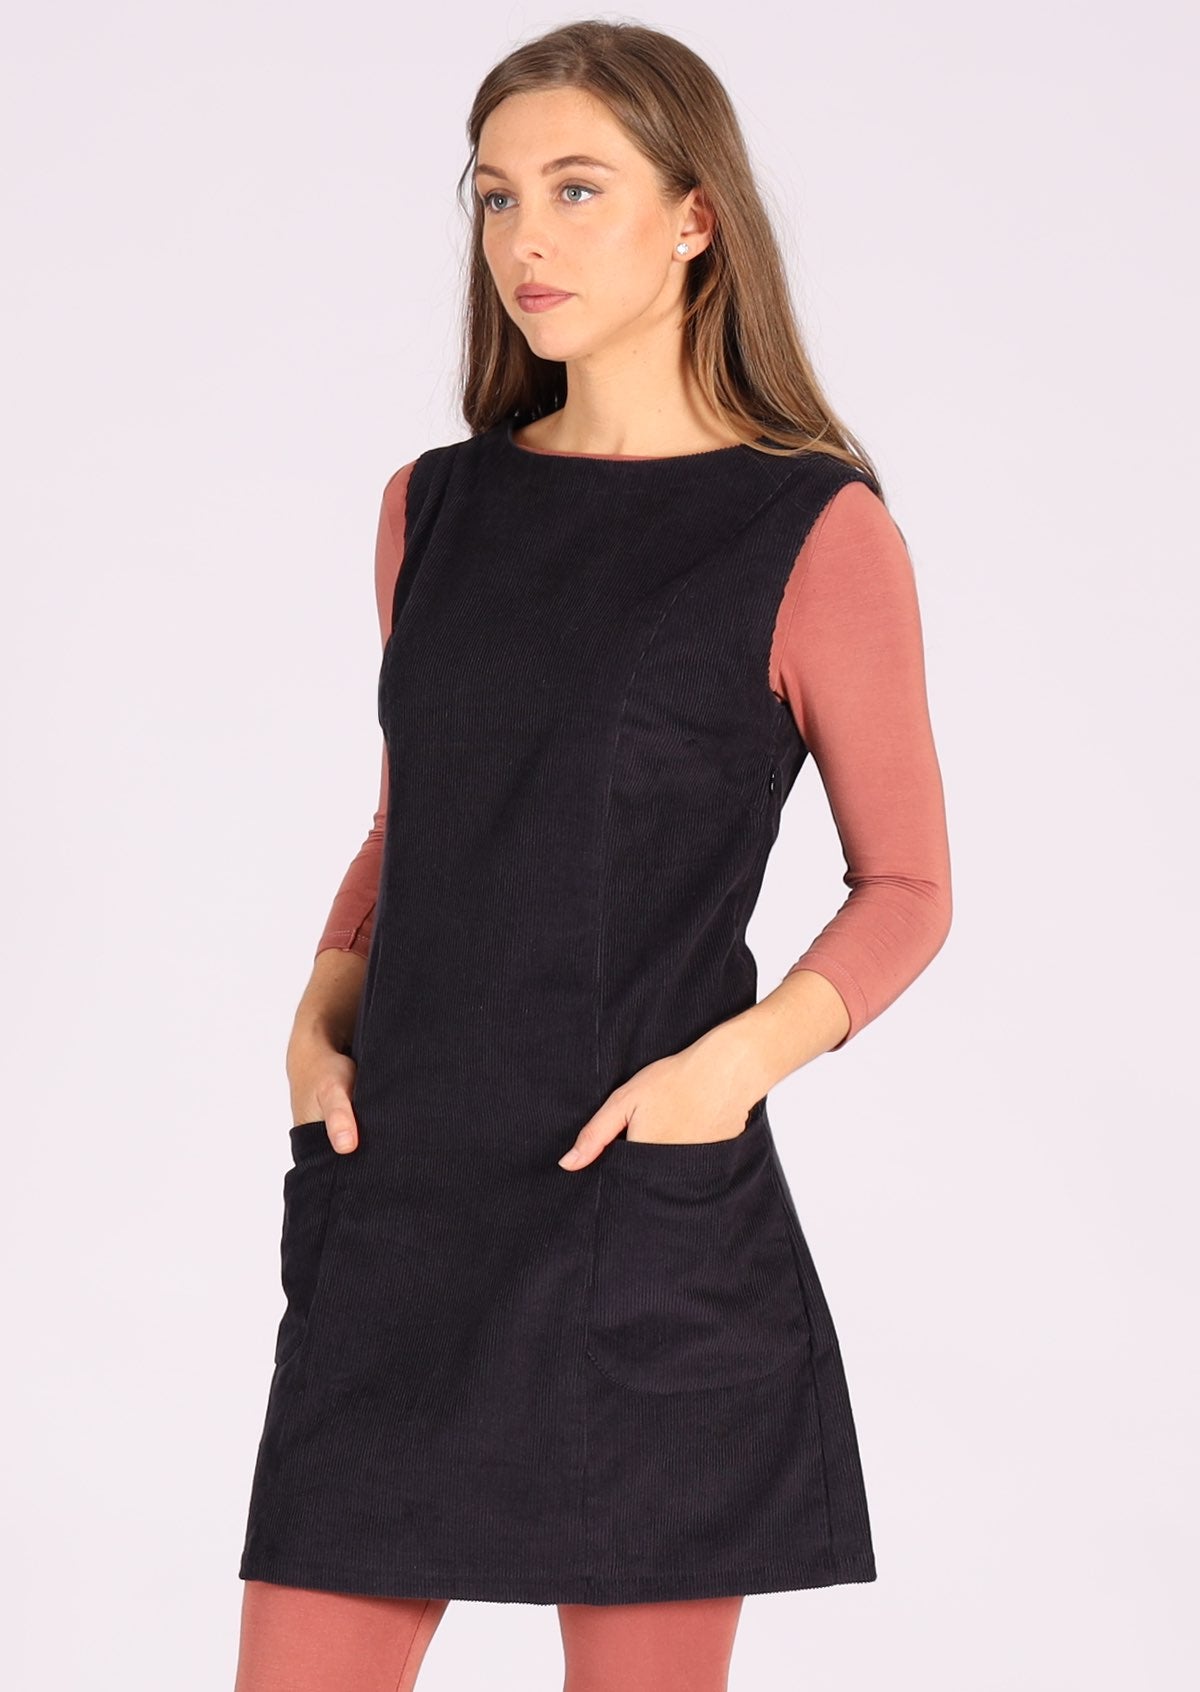 Sleeveless cotton corduroy tunic looks great layered over leggings and top